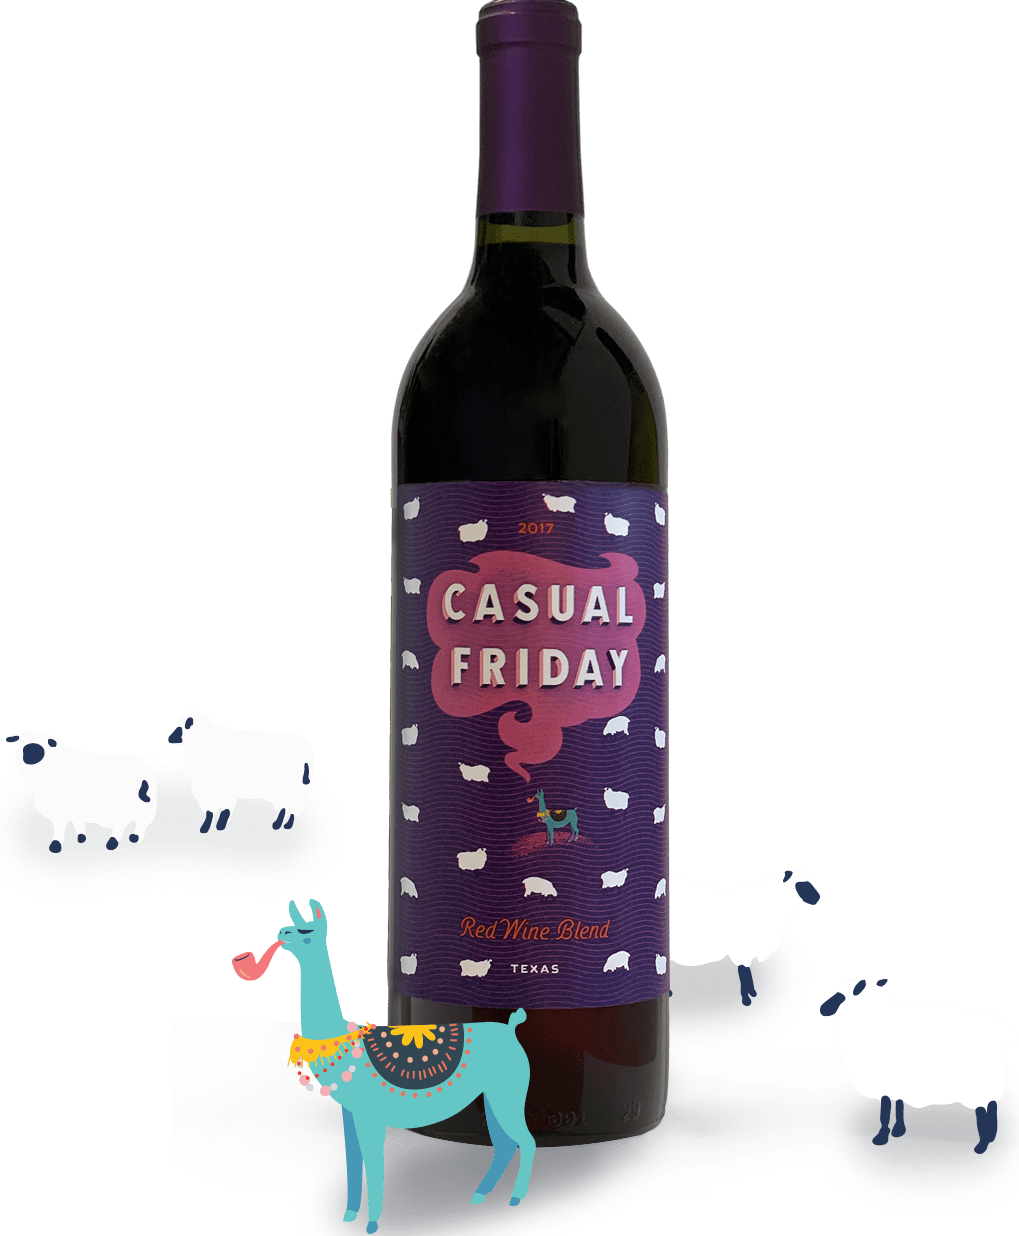 Casual Friday Winery Casual Friday Red Blend 2017